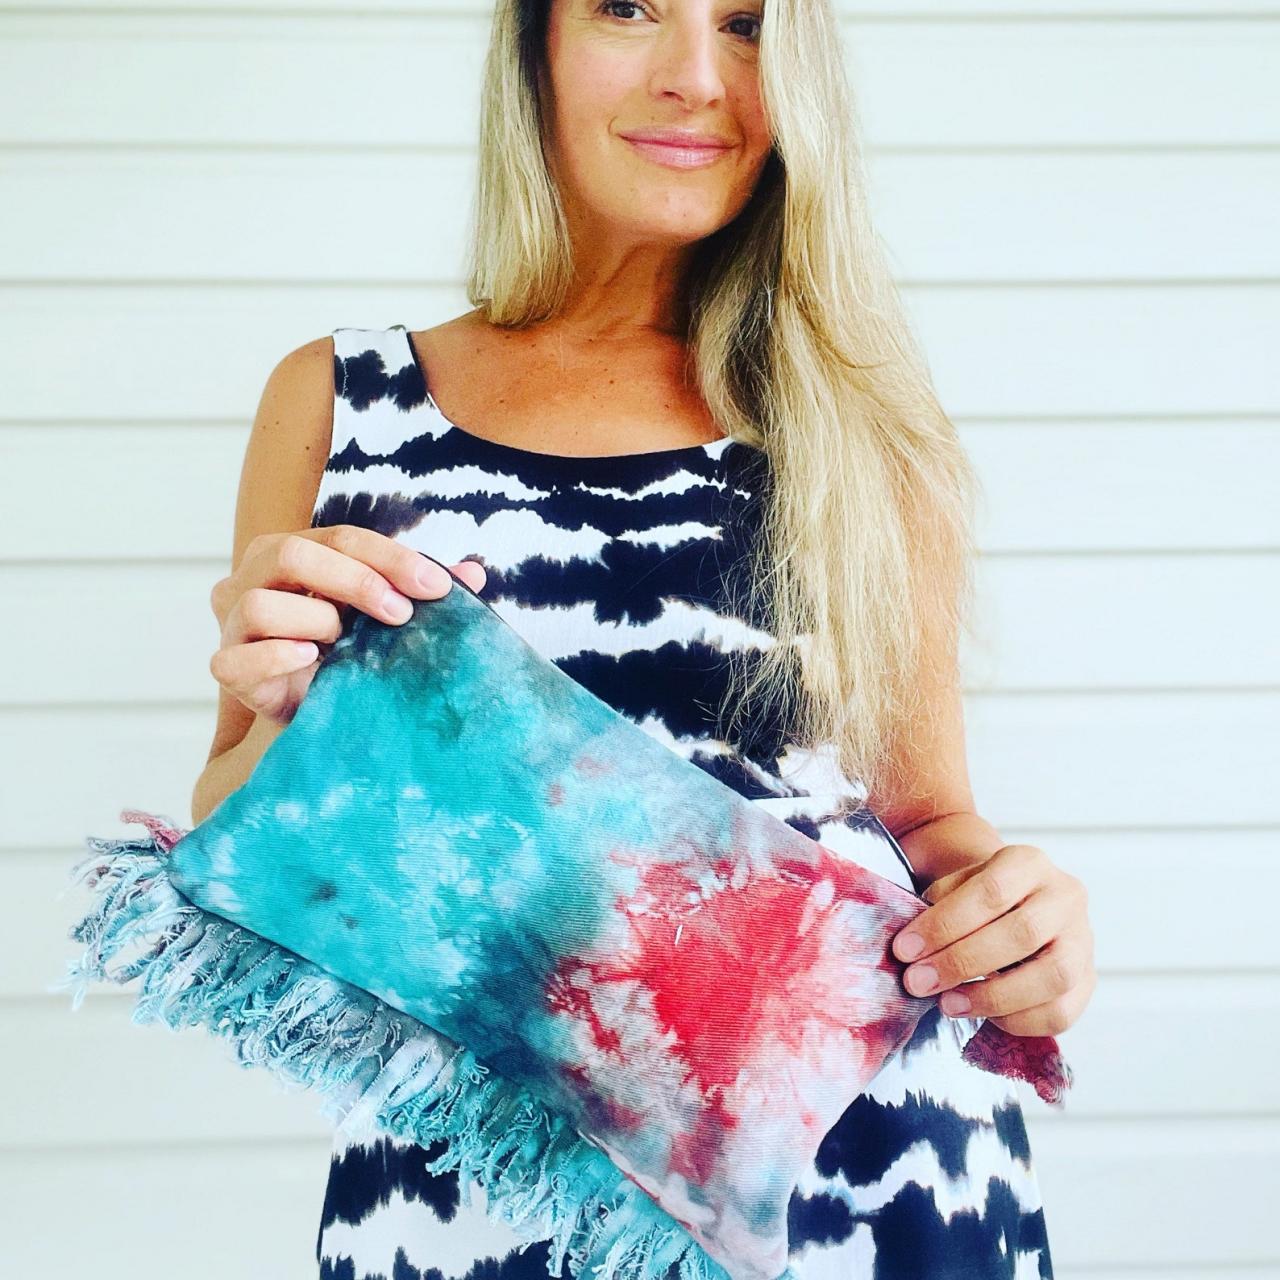 Tie Dyed Denim Fringe Clutch Bag, Denim Tie Dyed Teal, Orange And Gray Mix Clutch. 100% Handmade And Hand Dyed By Small Business.